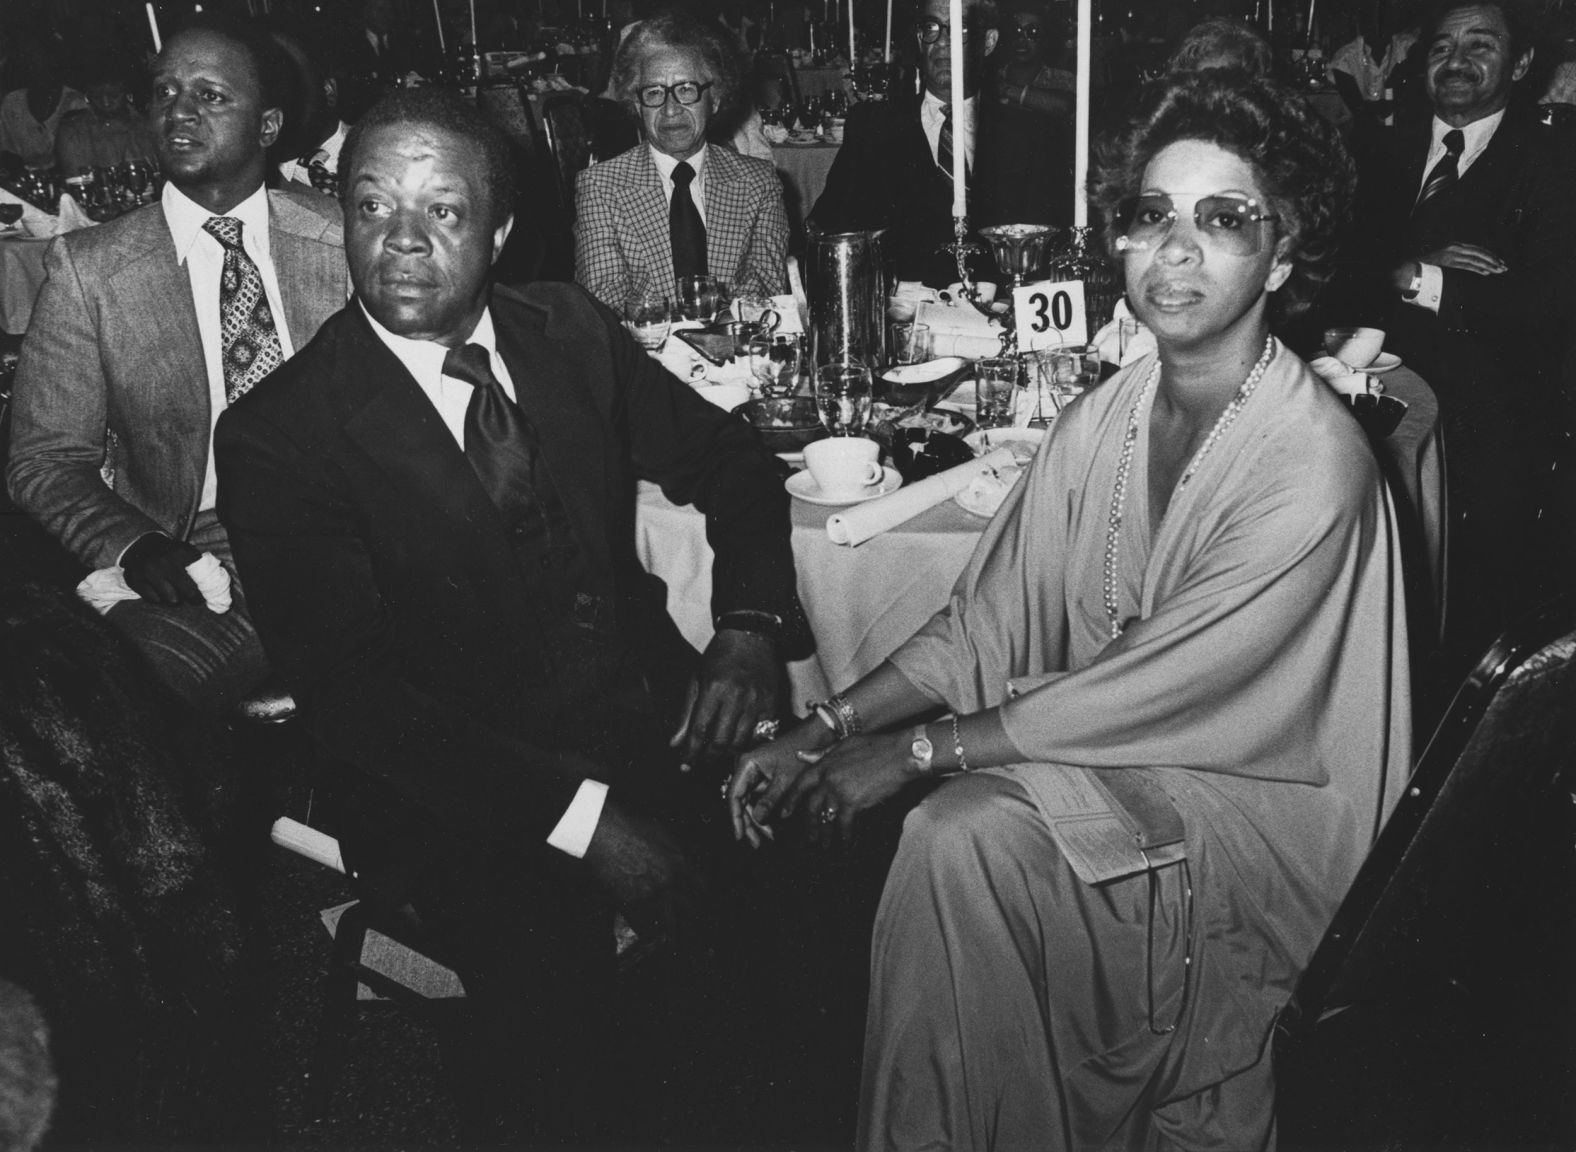 Elder and his wife, Sharon, attend a gala event together in 1979.